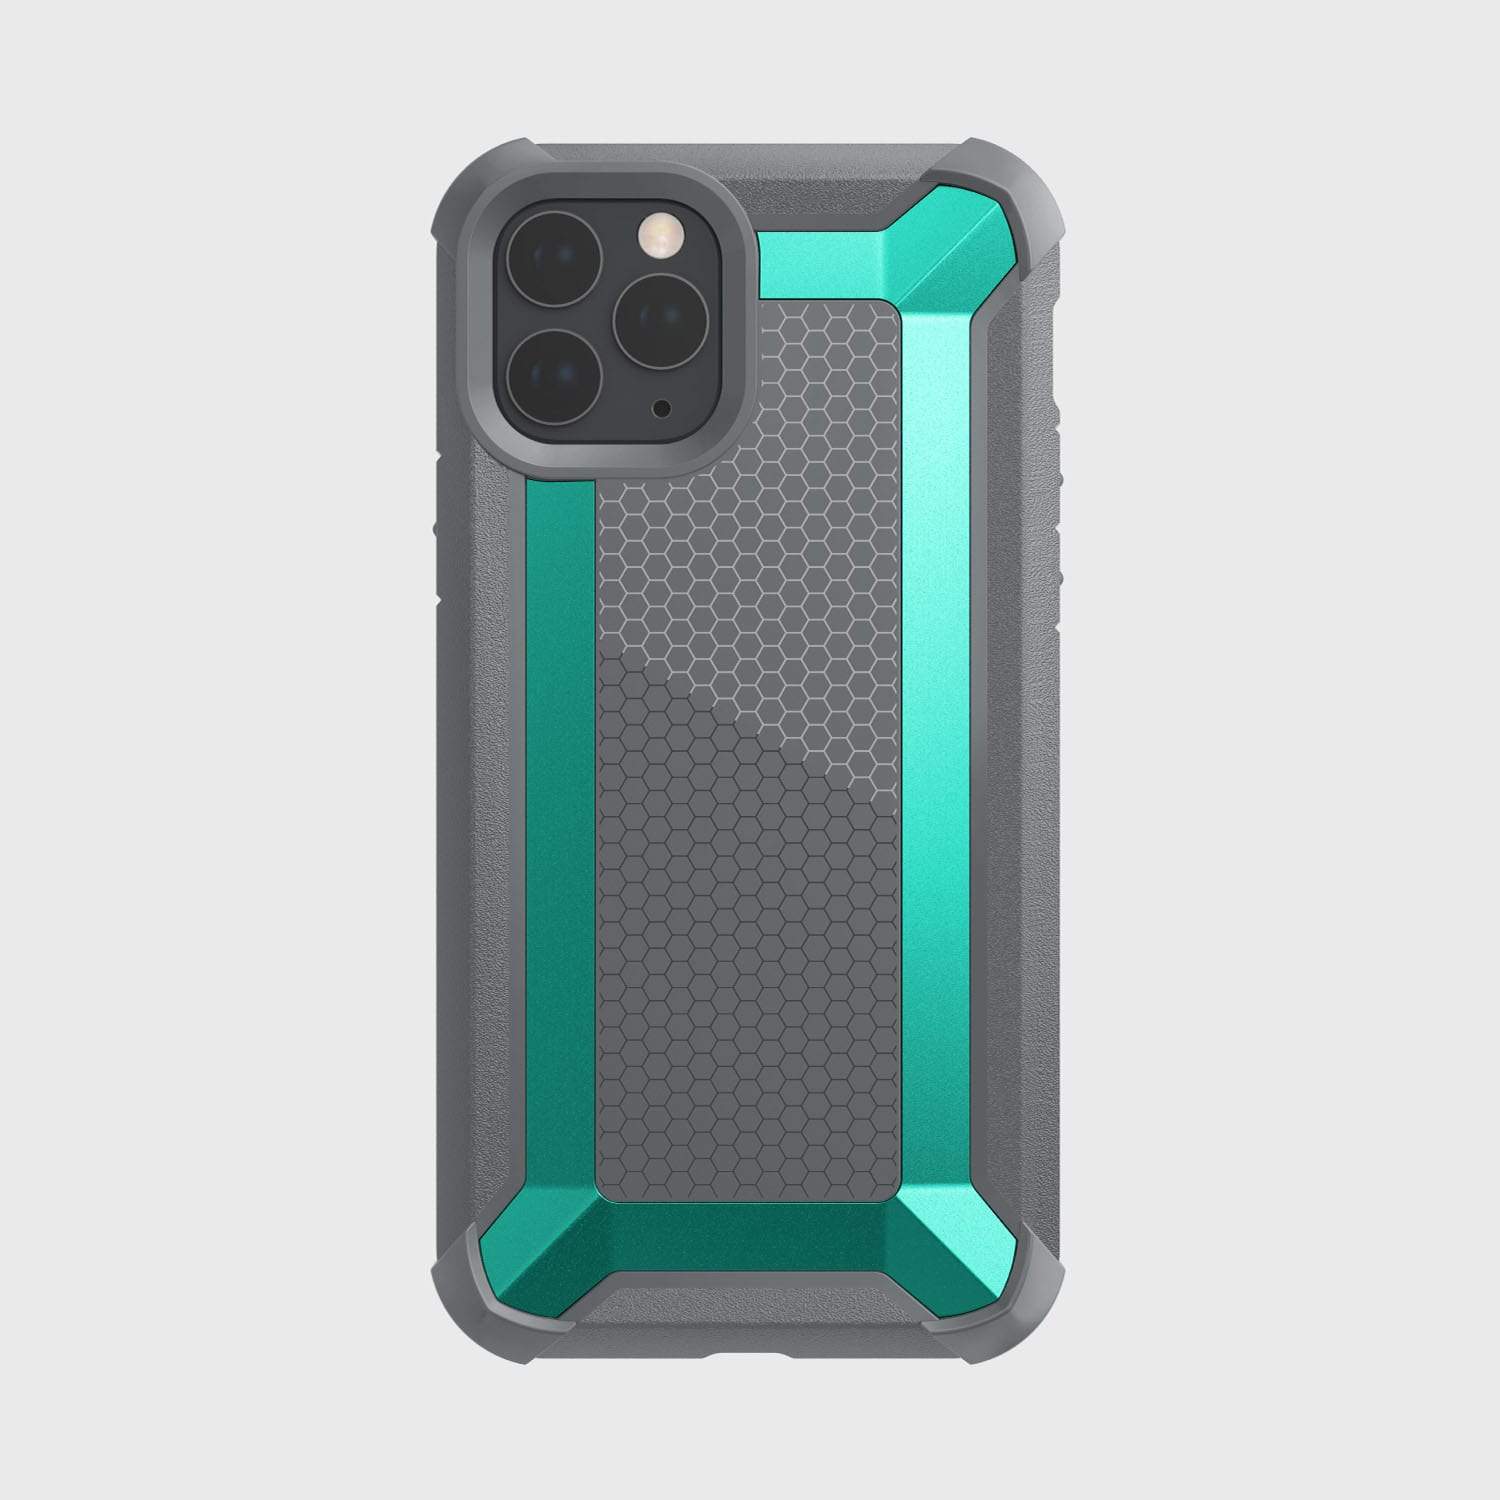 The protective iPhone 11 Pro case in grey and teal is shock-absorbing. 
The protective iPhone 11 Pro case - TACTICAL in grey and teal is shock-absorbing by Raptic.